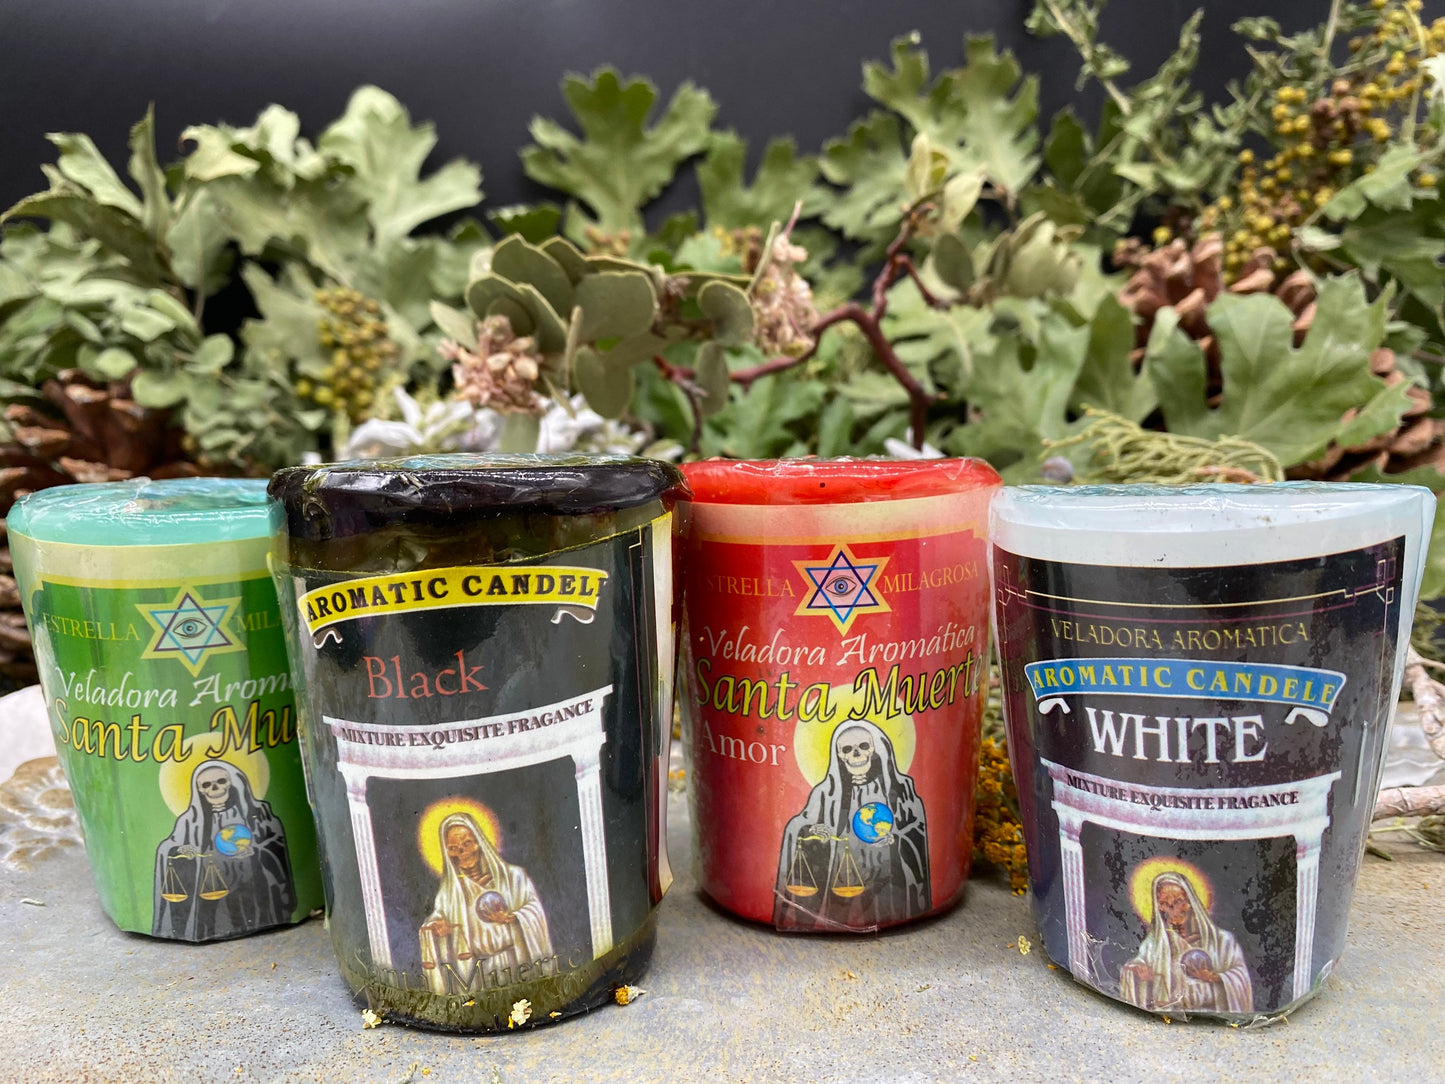 Santa Muerte Votive Candle Set + Made in Mexico